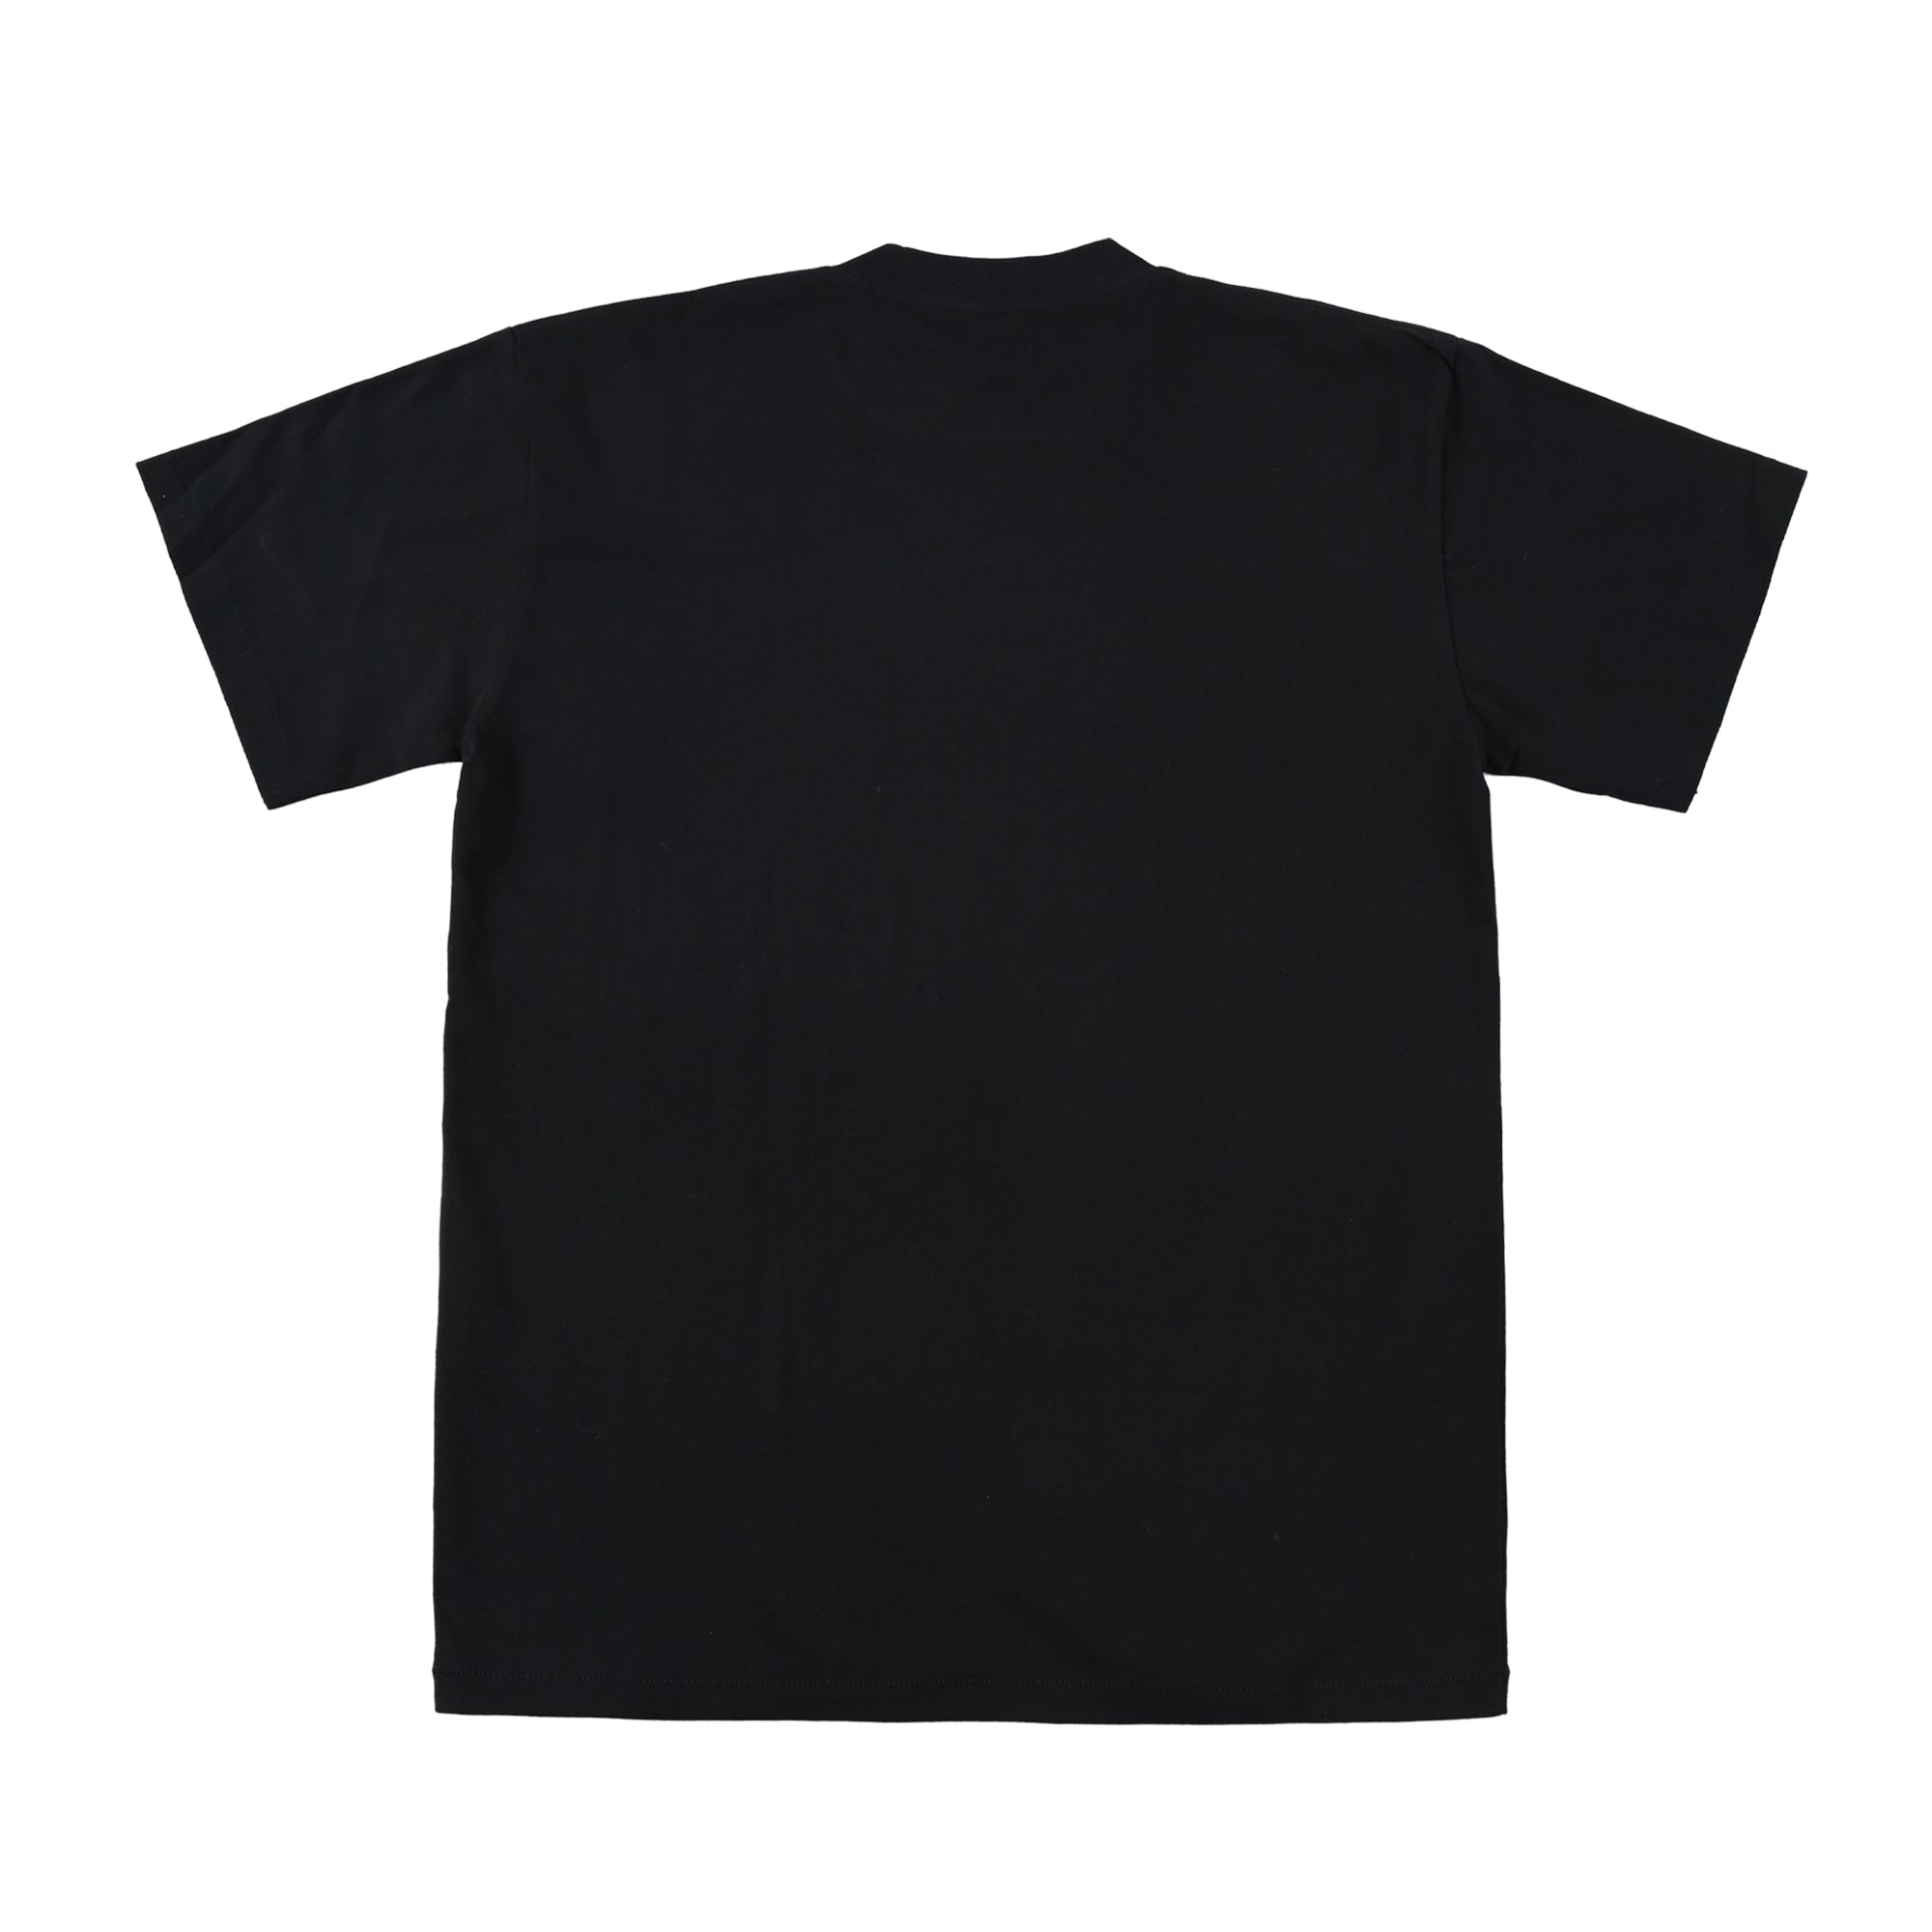 The Salvages AW22 Voyager N.4 T-shirt in Black